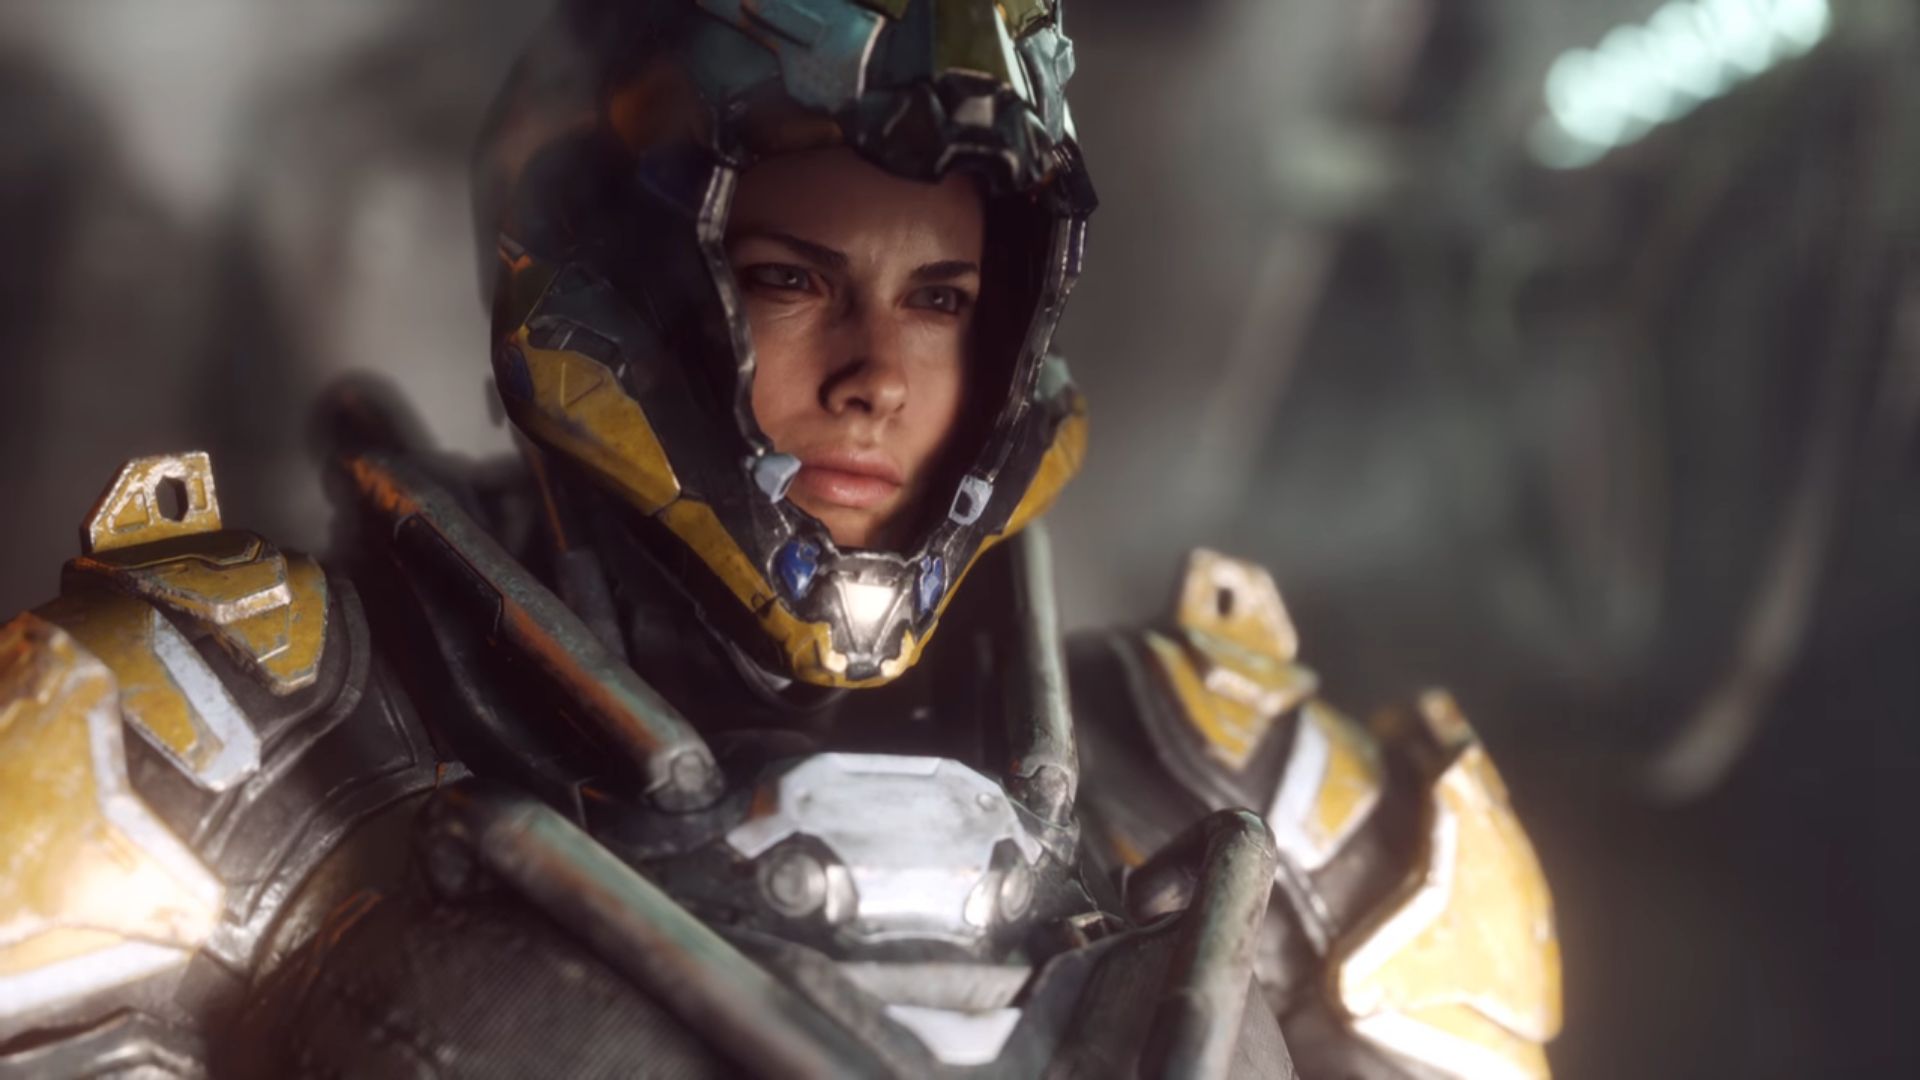 Image for After parts of Mass Effect: Andromeda's story were left untold, BioWare vows to focus on Anthem's world and story